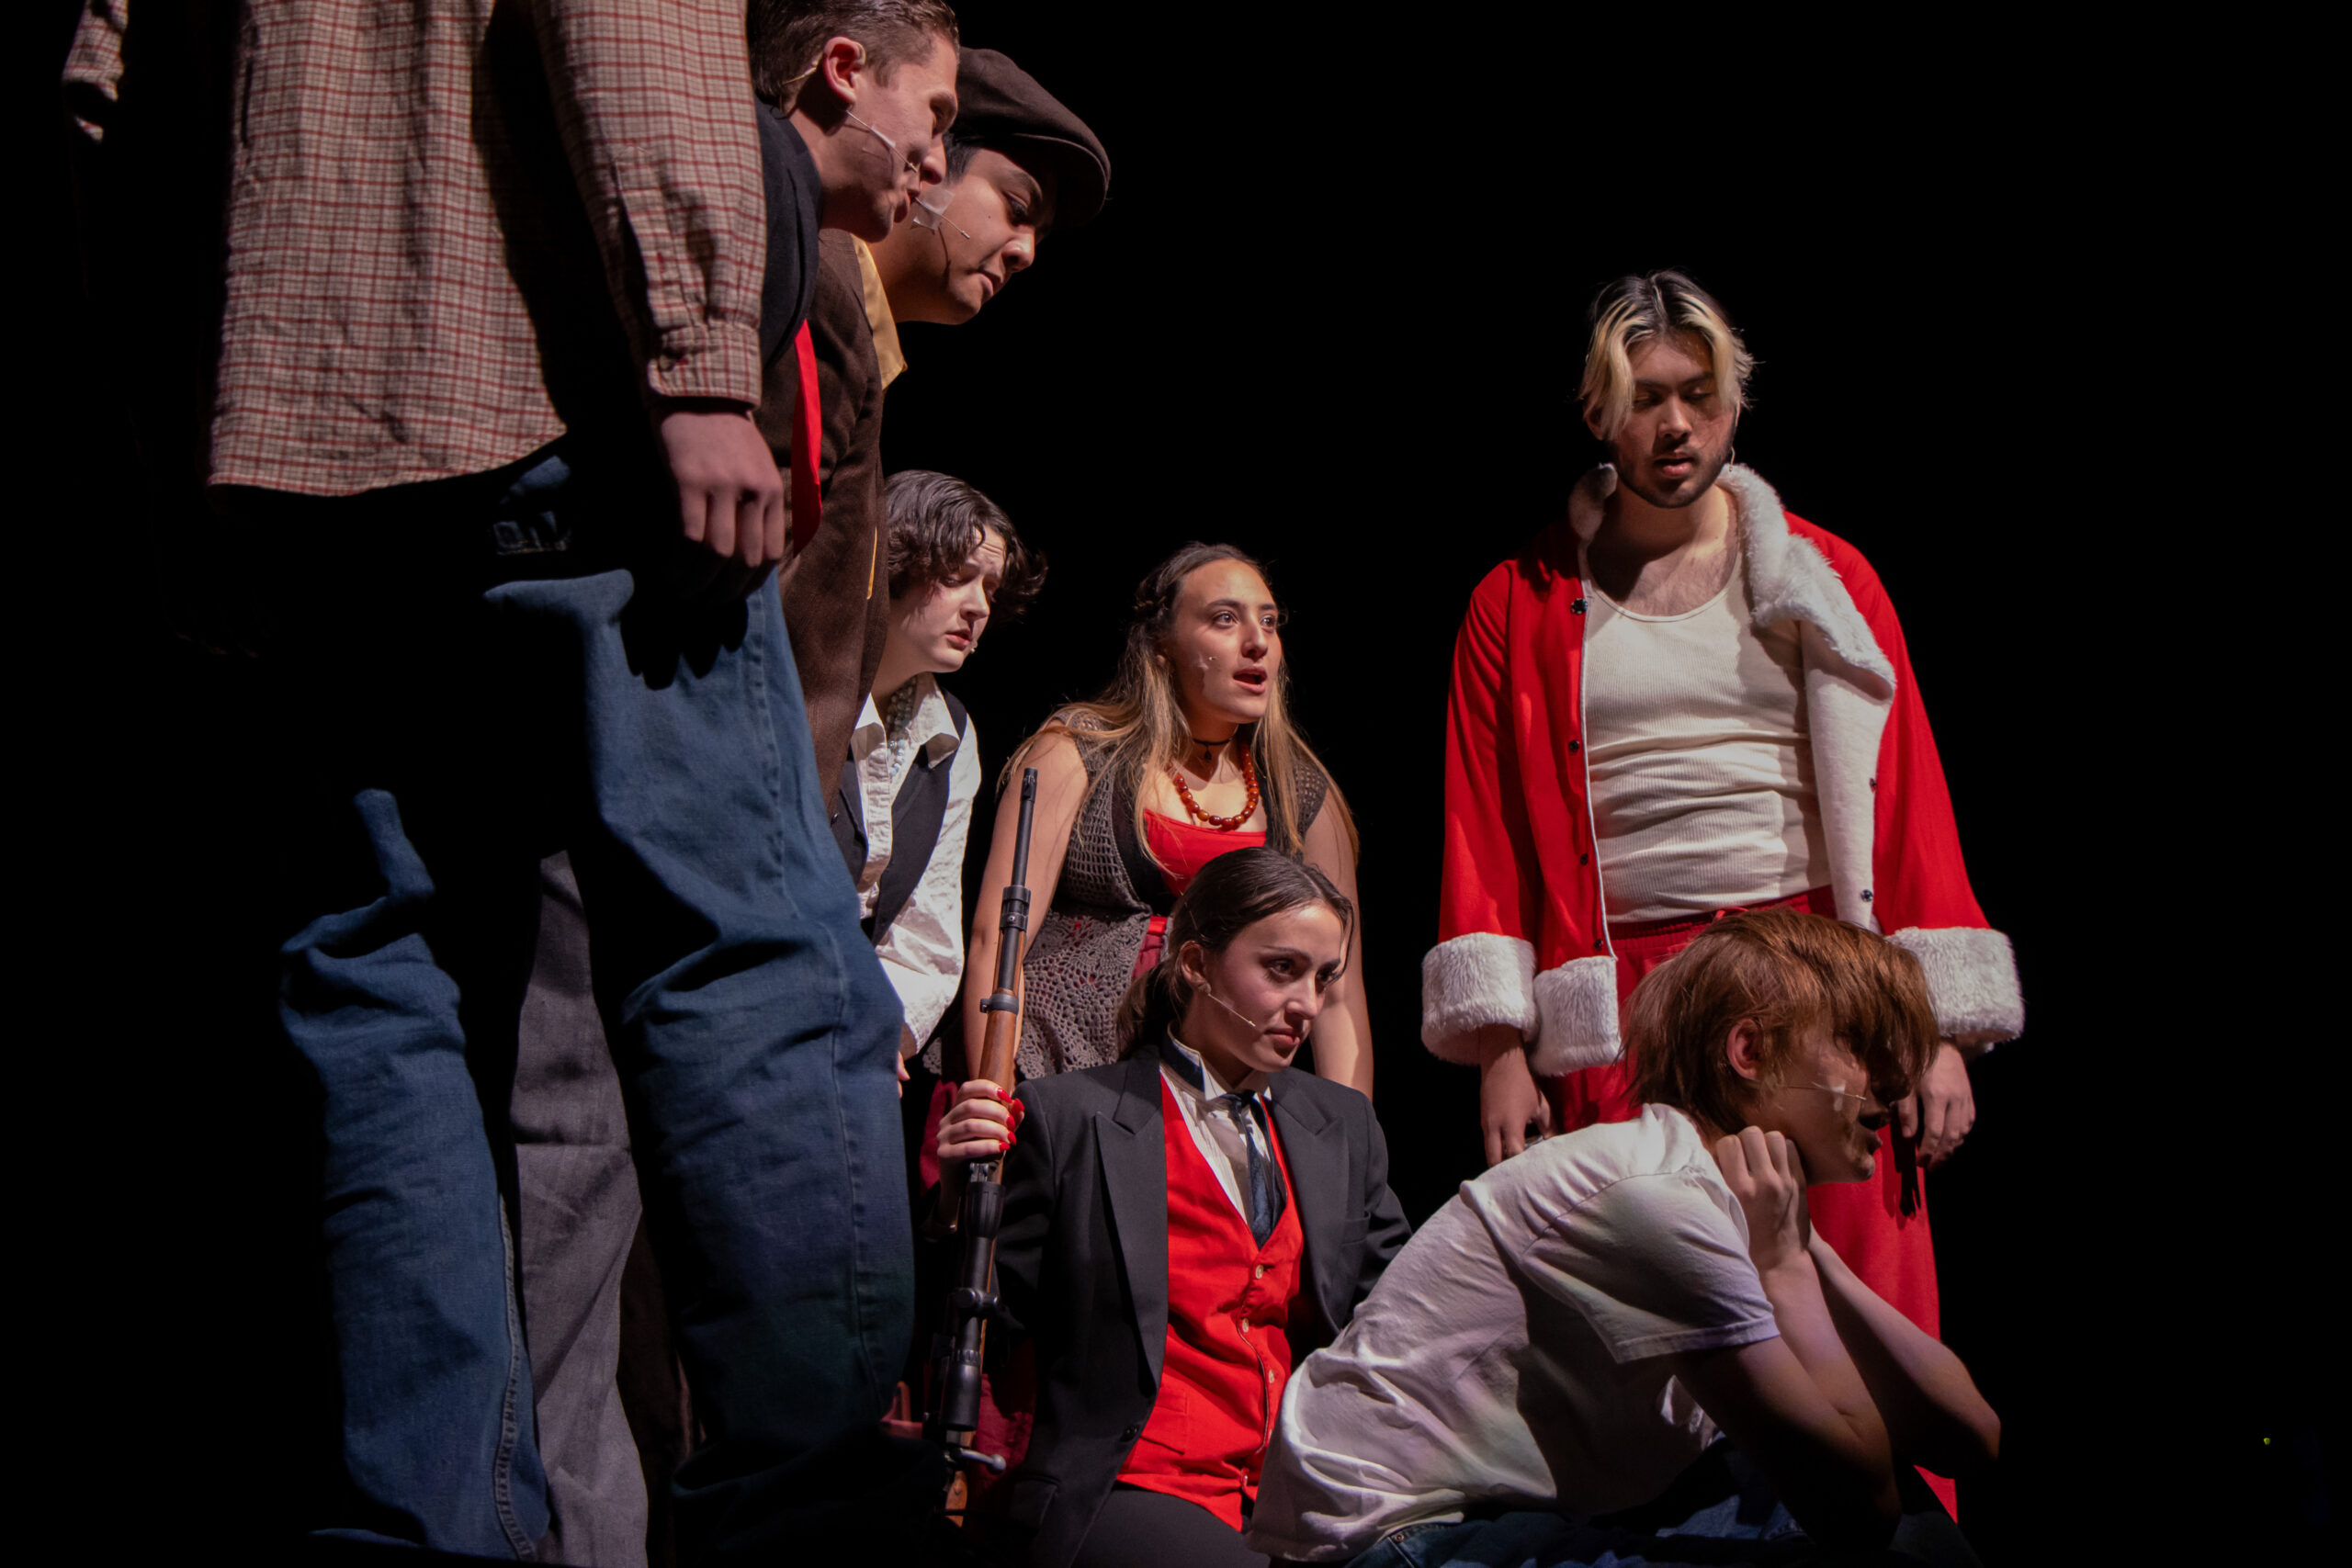 UNR Theater and Dance misfires with “Assassins”